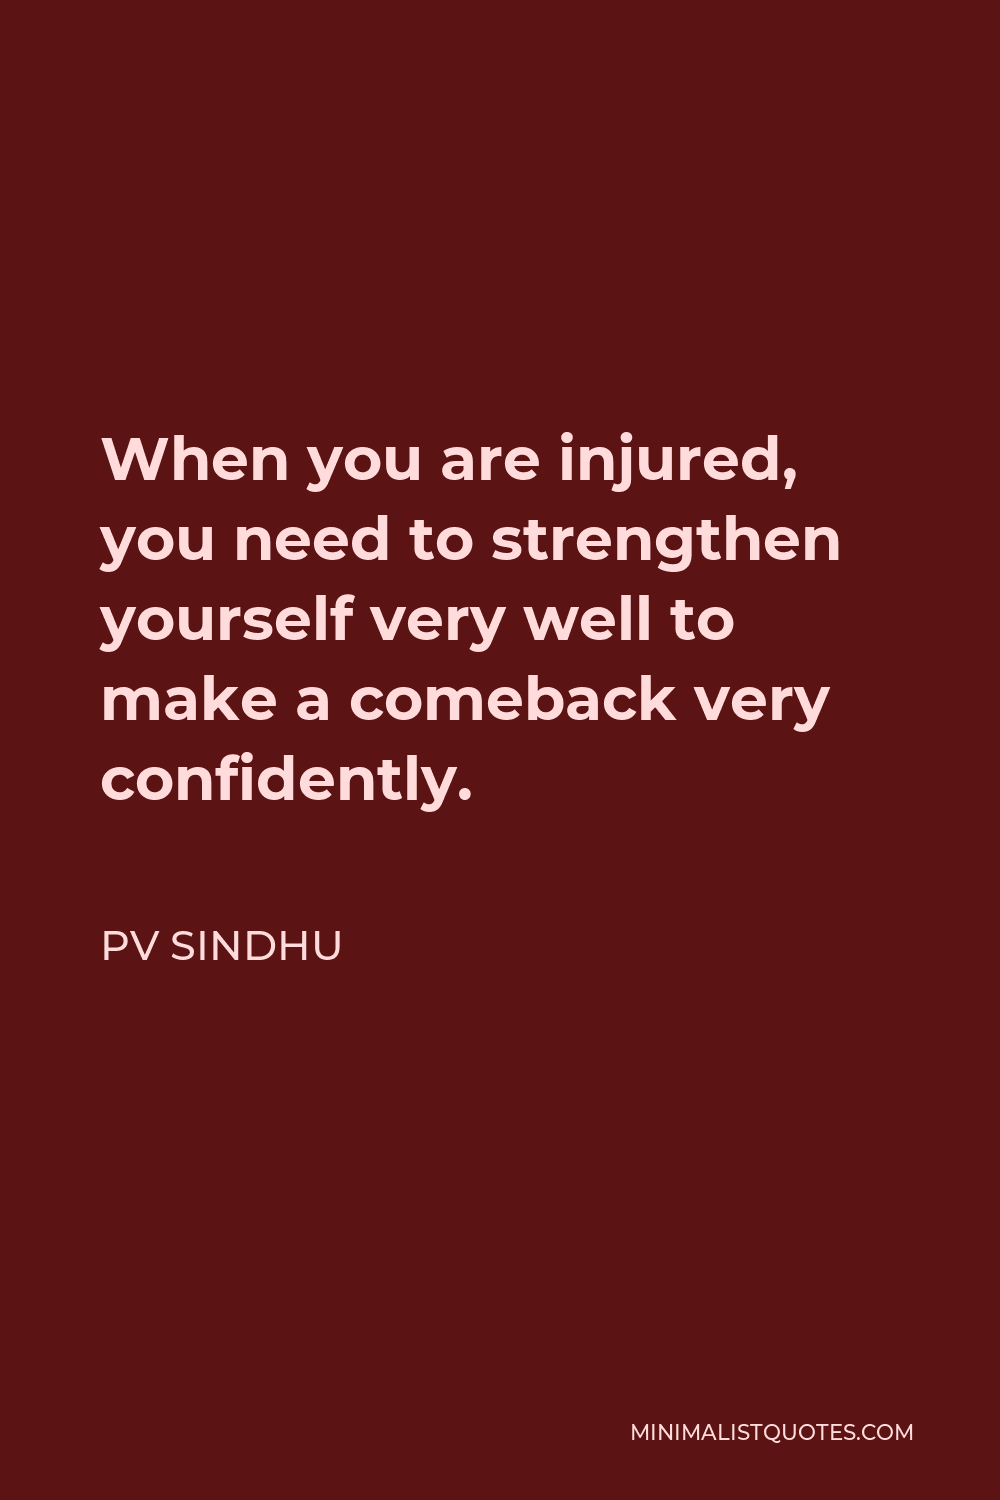 PV Sindhu Quote: When you are injured, you need to